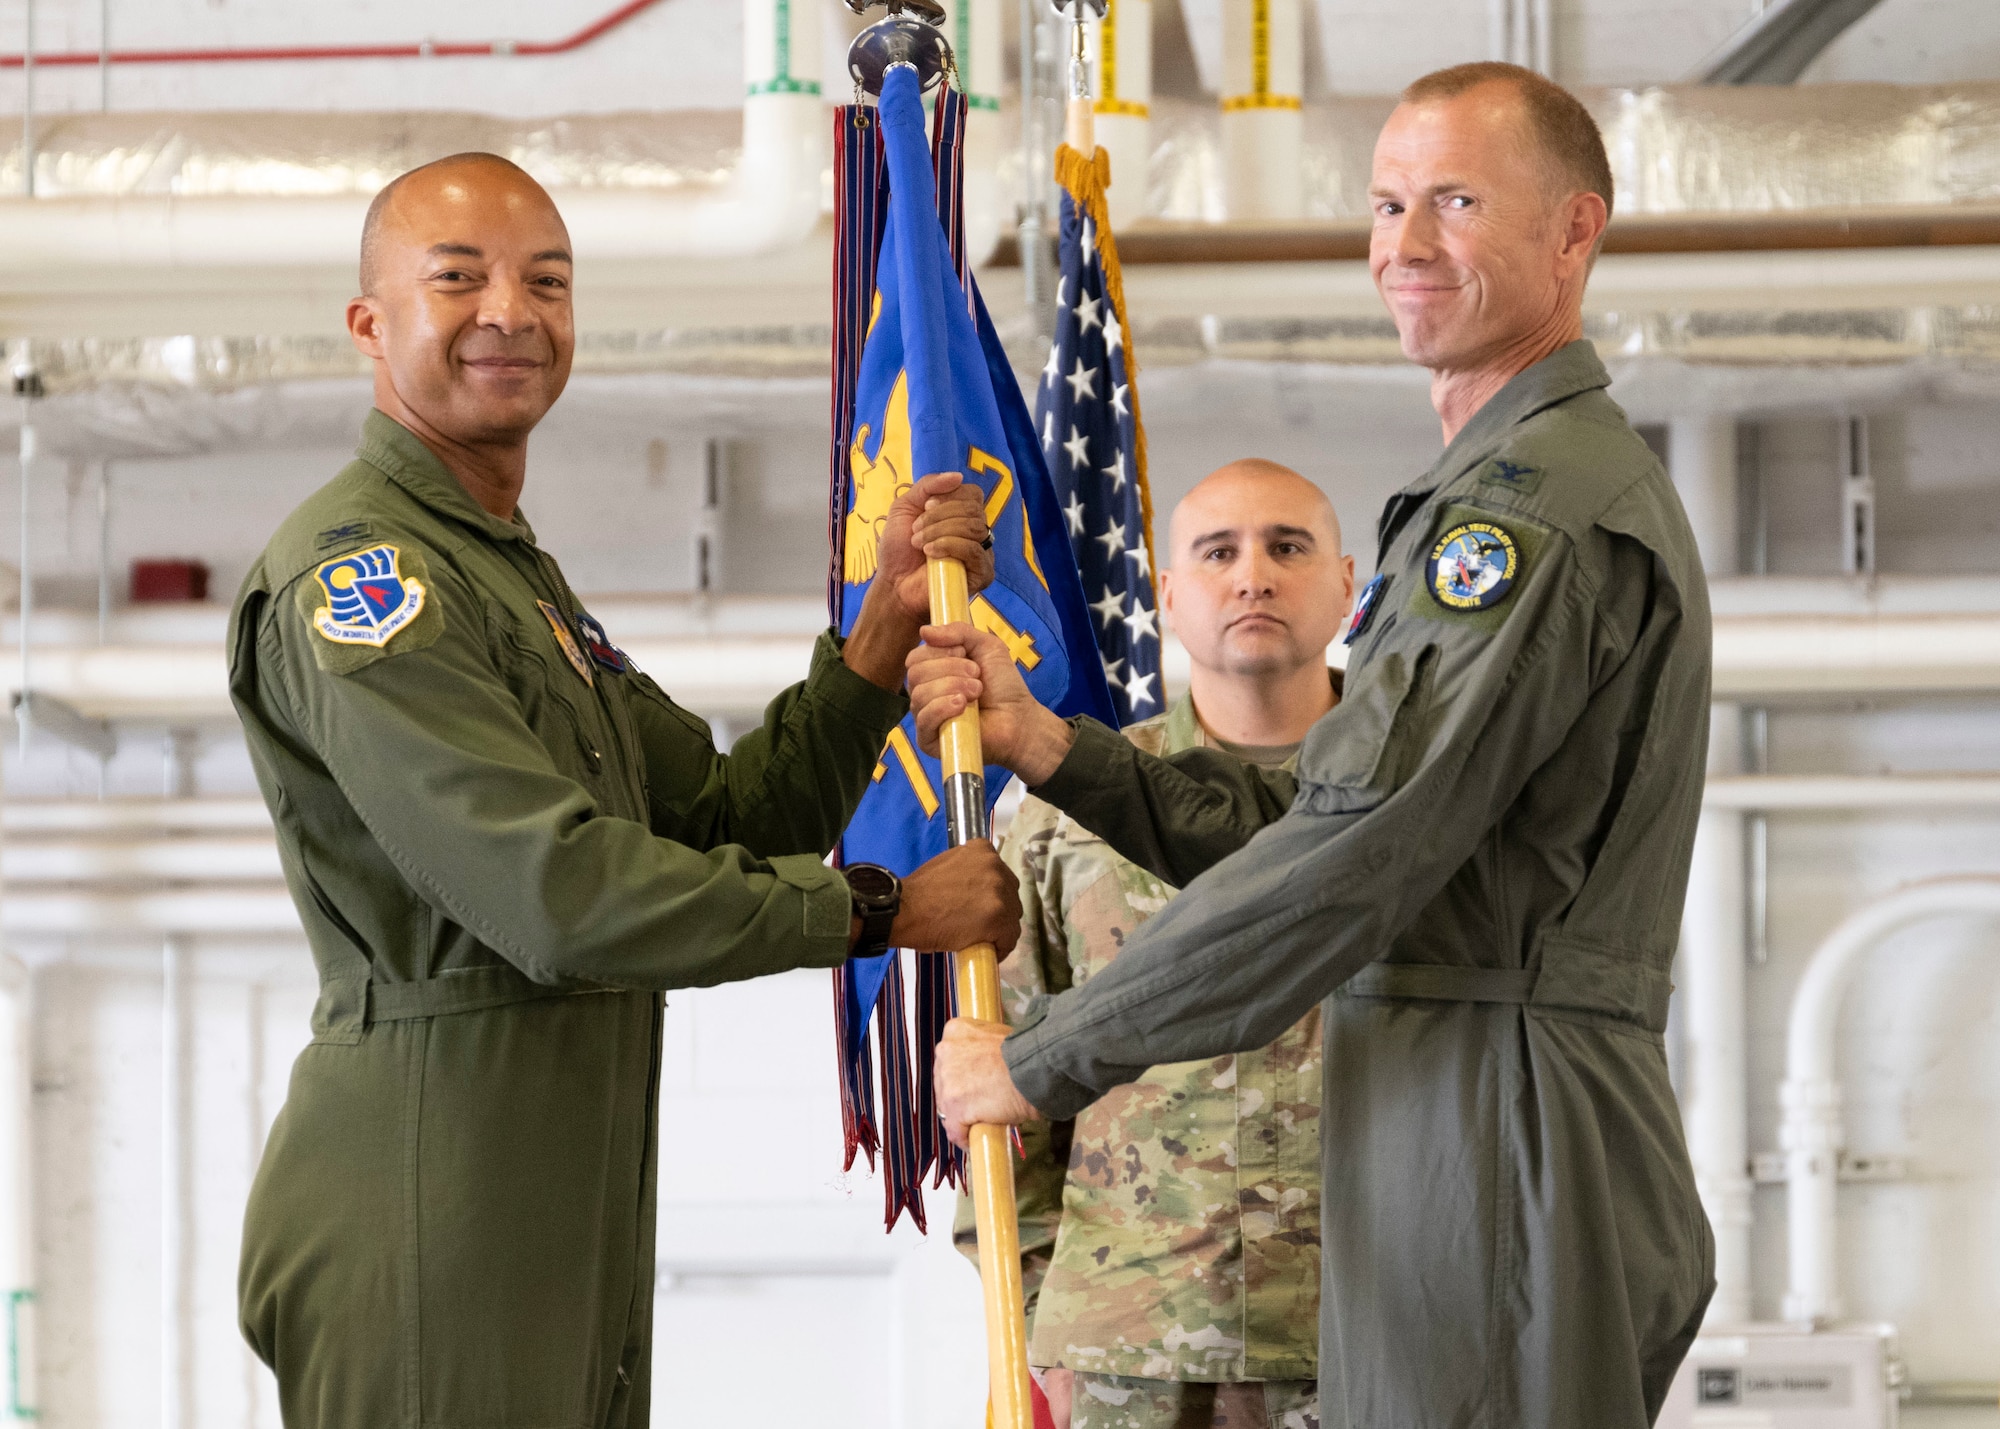 Col. Randel Gordon, commander, Arnold Engineering Development Complex, passes the guidon to Col. Karl Seekamp. Both men are smiling and looking at the camera.